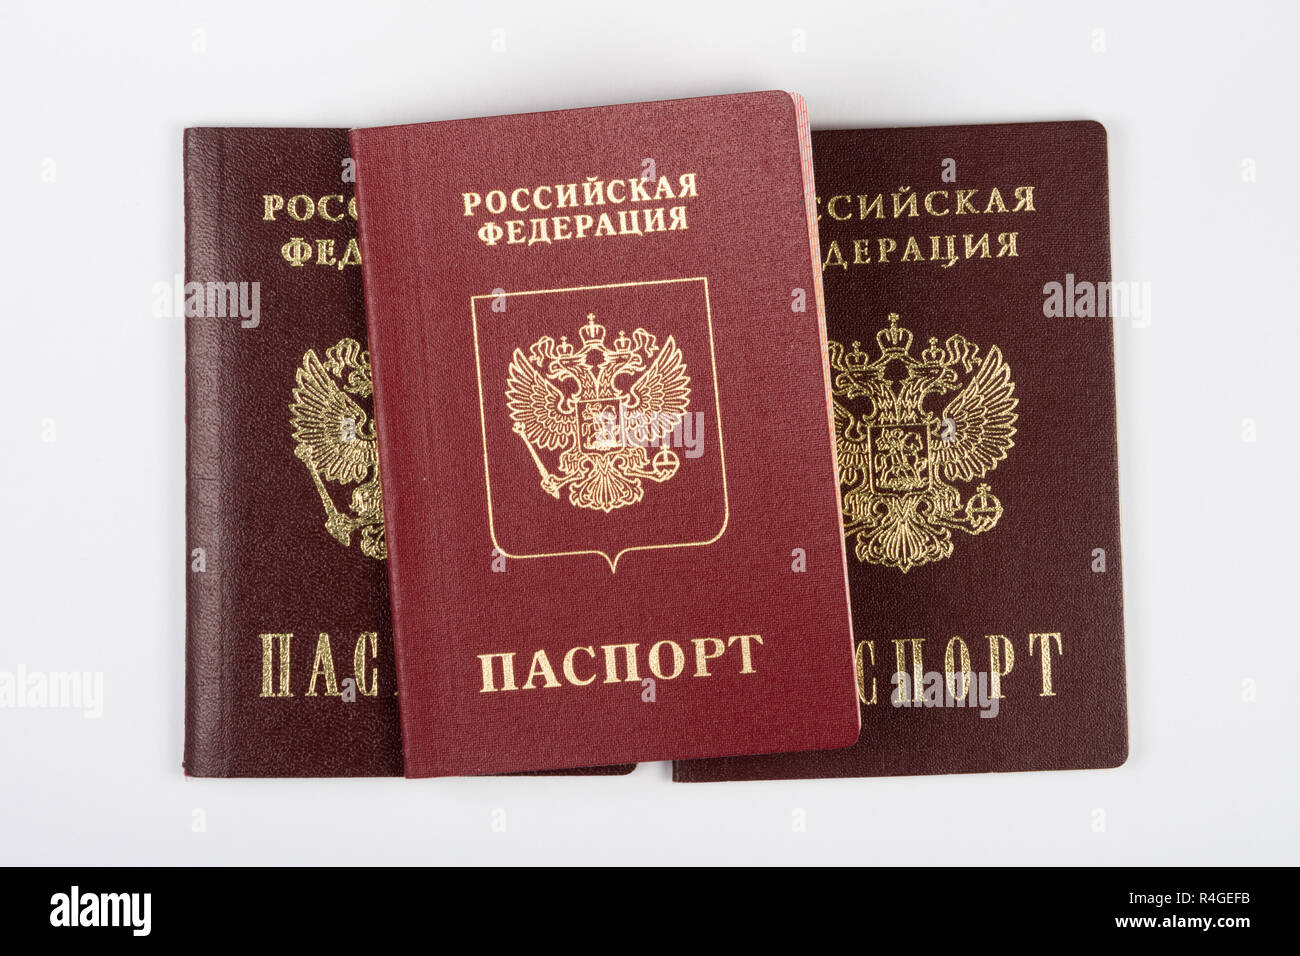 Three passport of the citizen of the Russian Federation on a white background Stock Photo